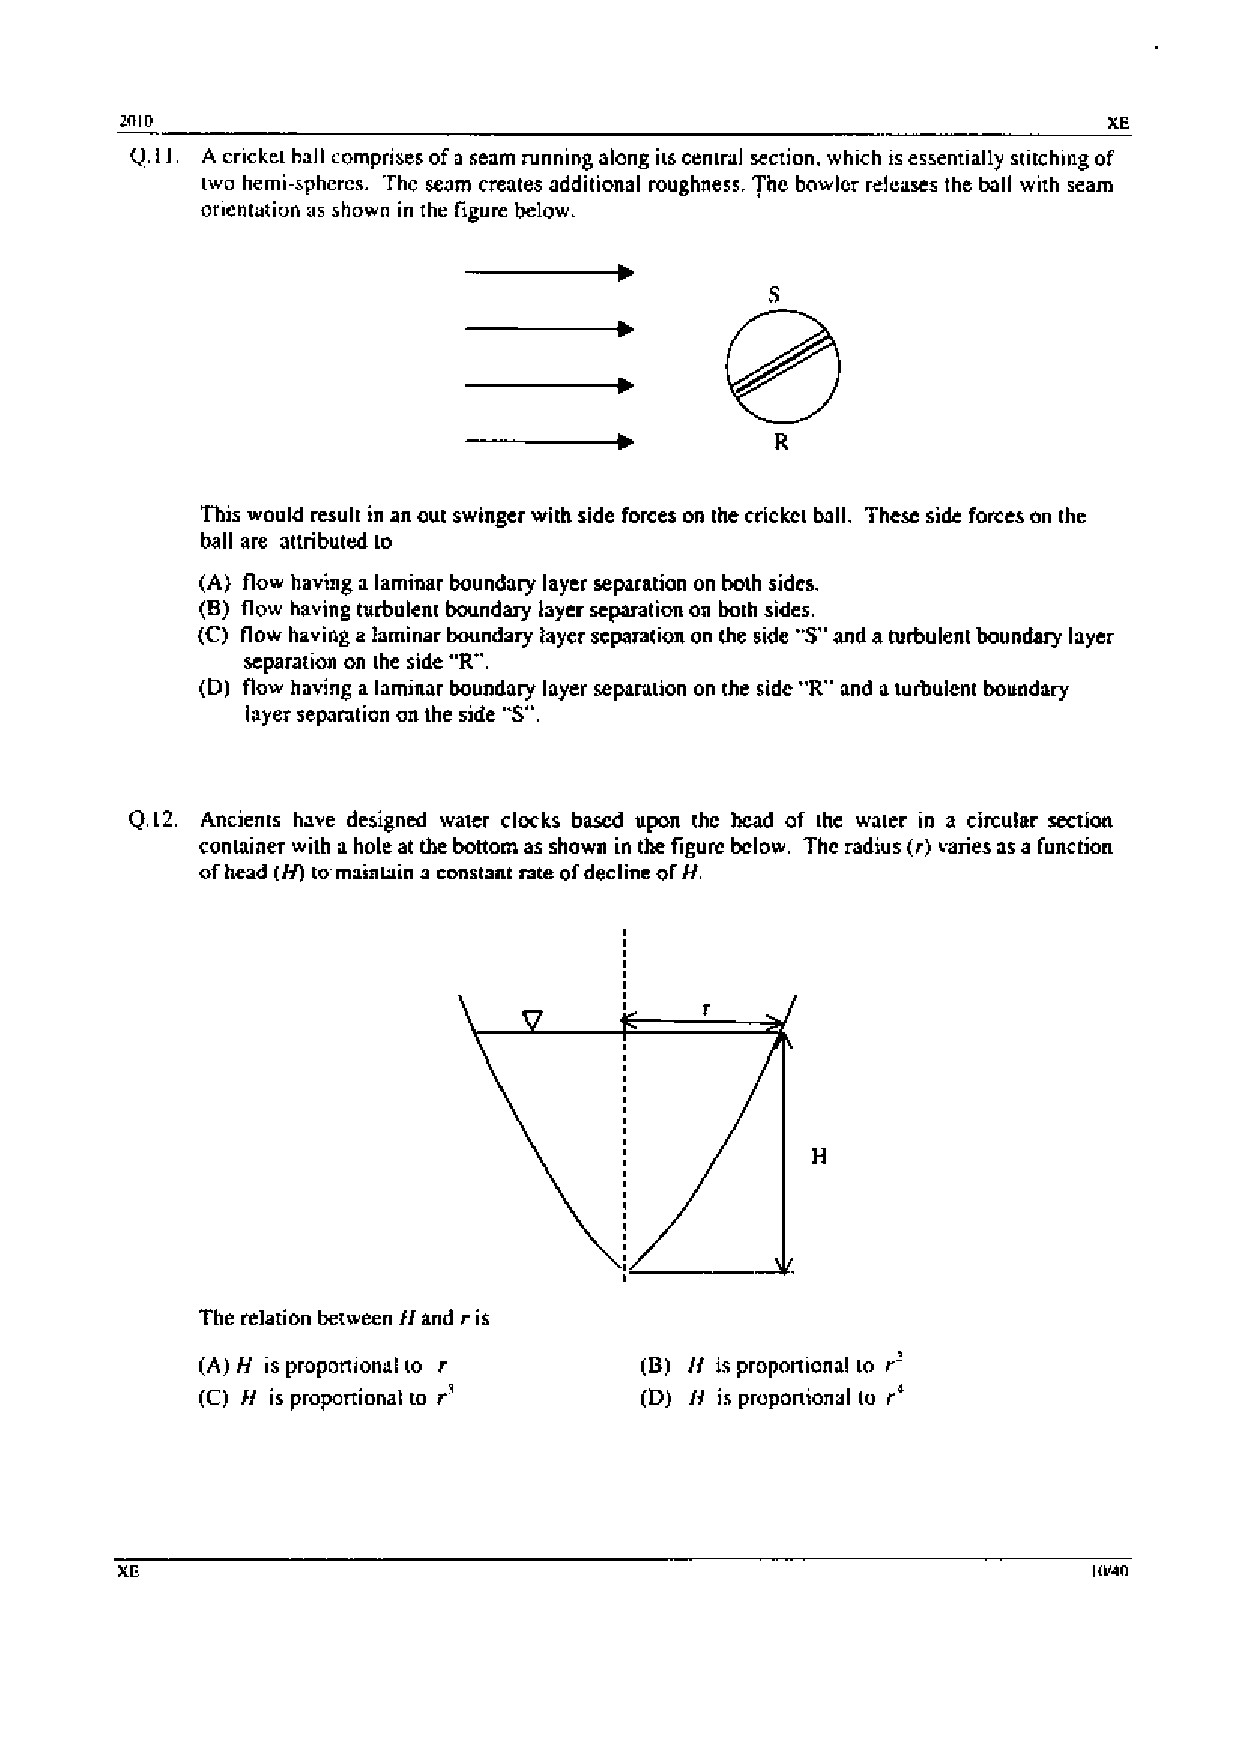 GATE Exam Question Paper 2010 Engineering Sciences 10